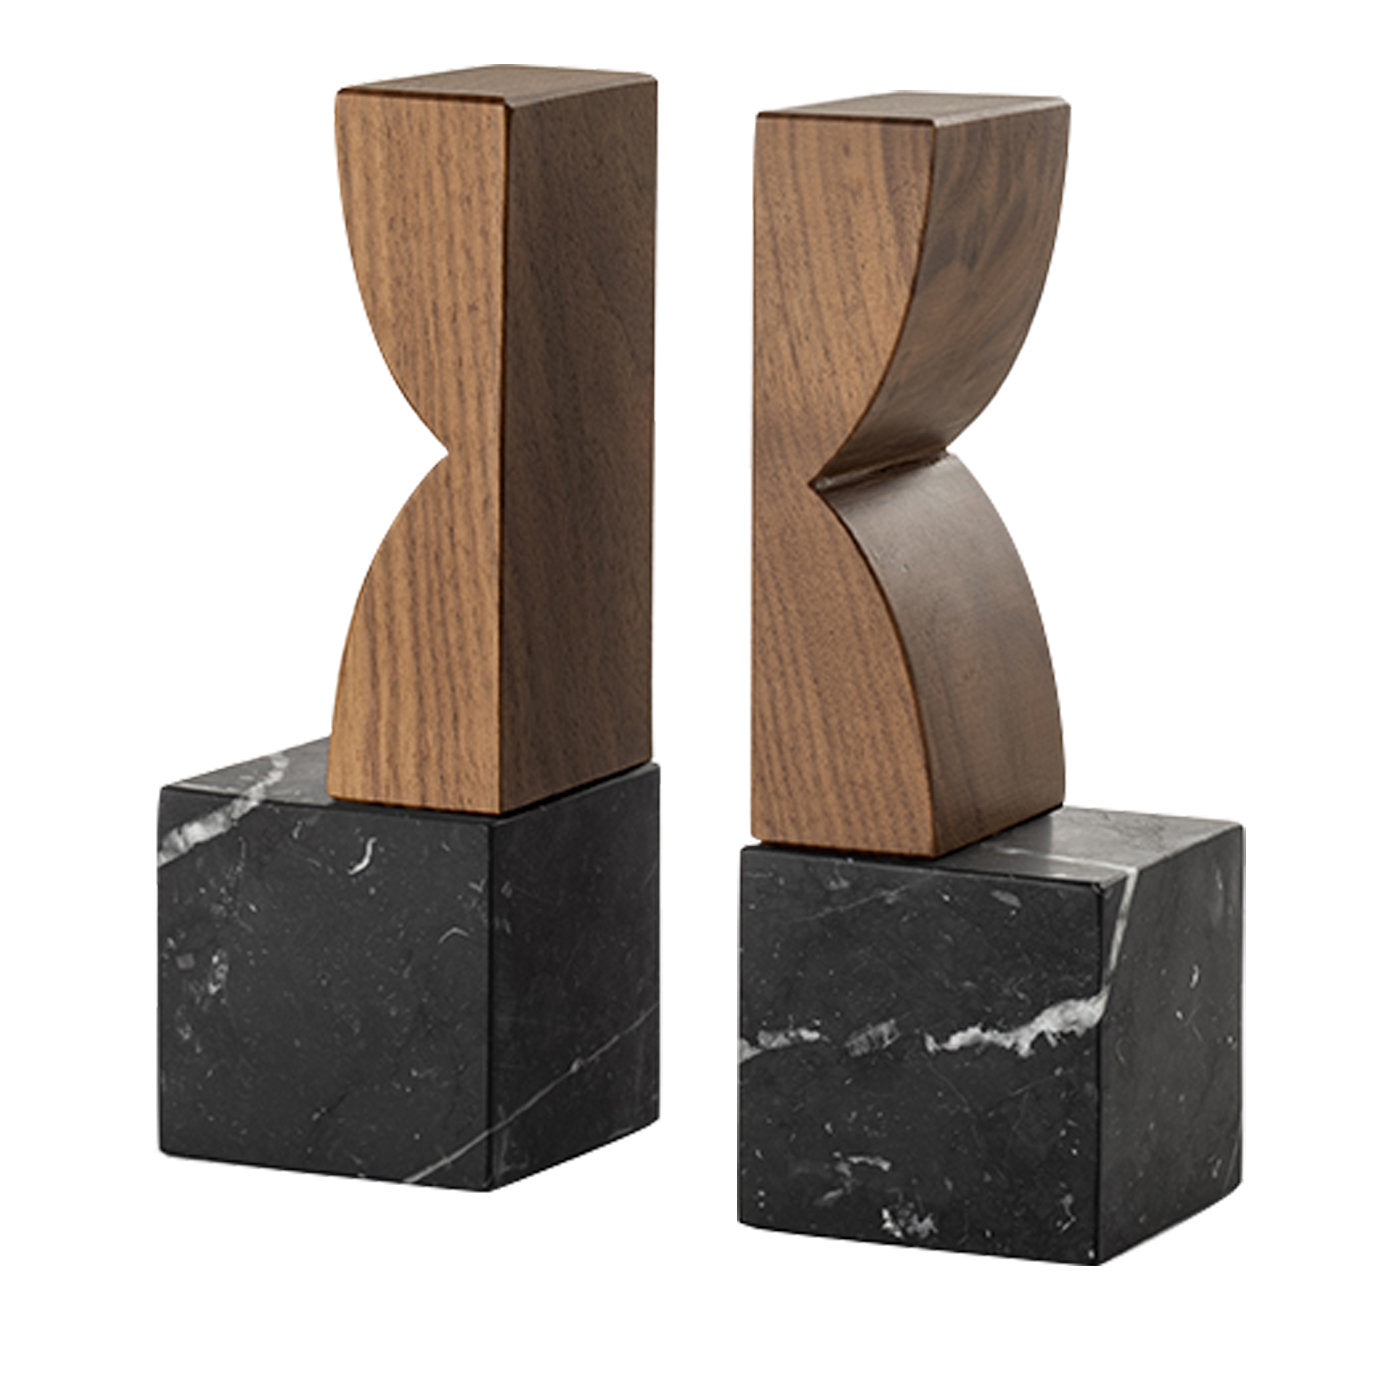 Constantin Bookends by Agustina Bottoni - Main view